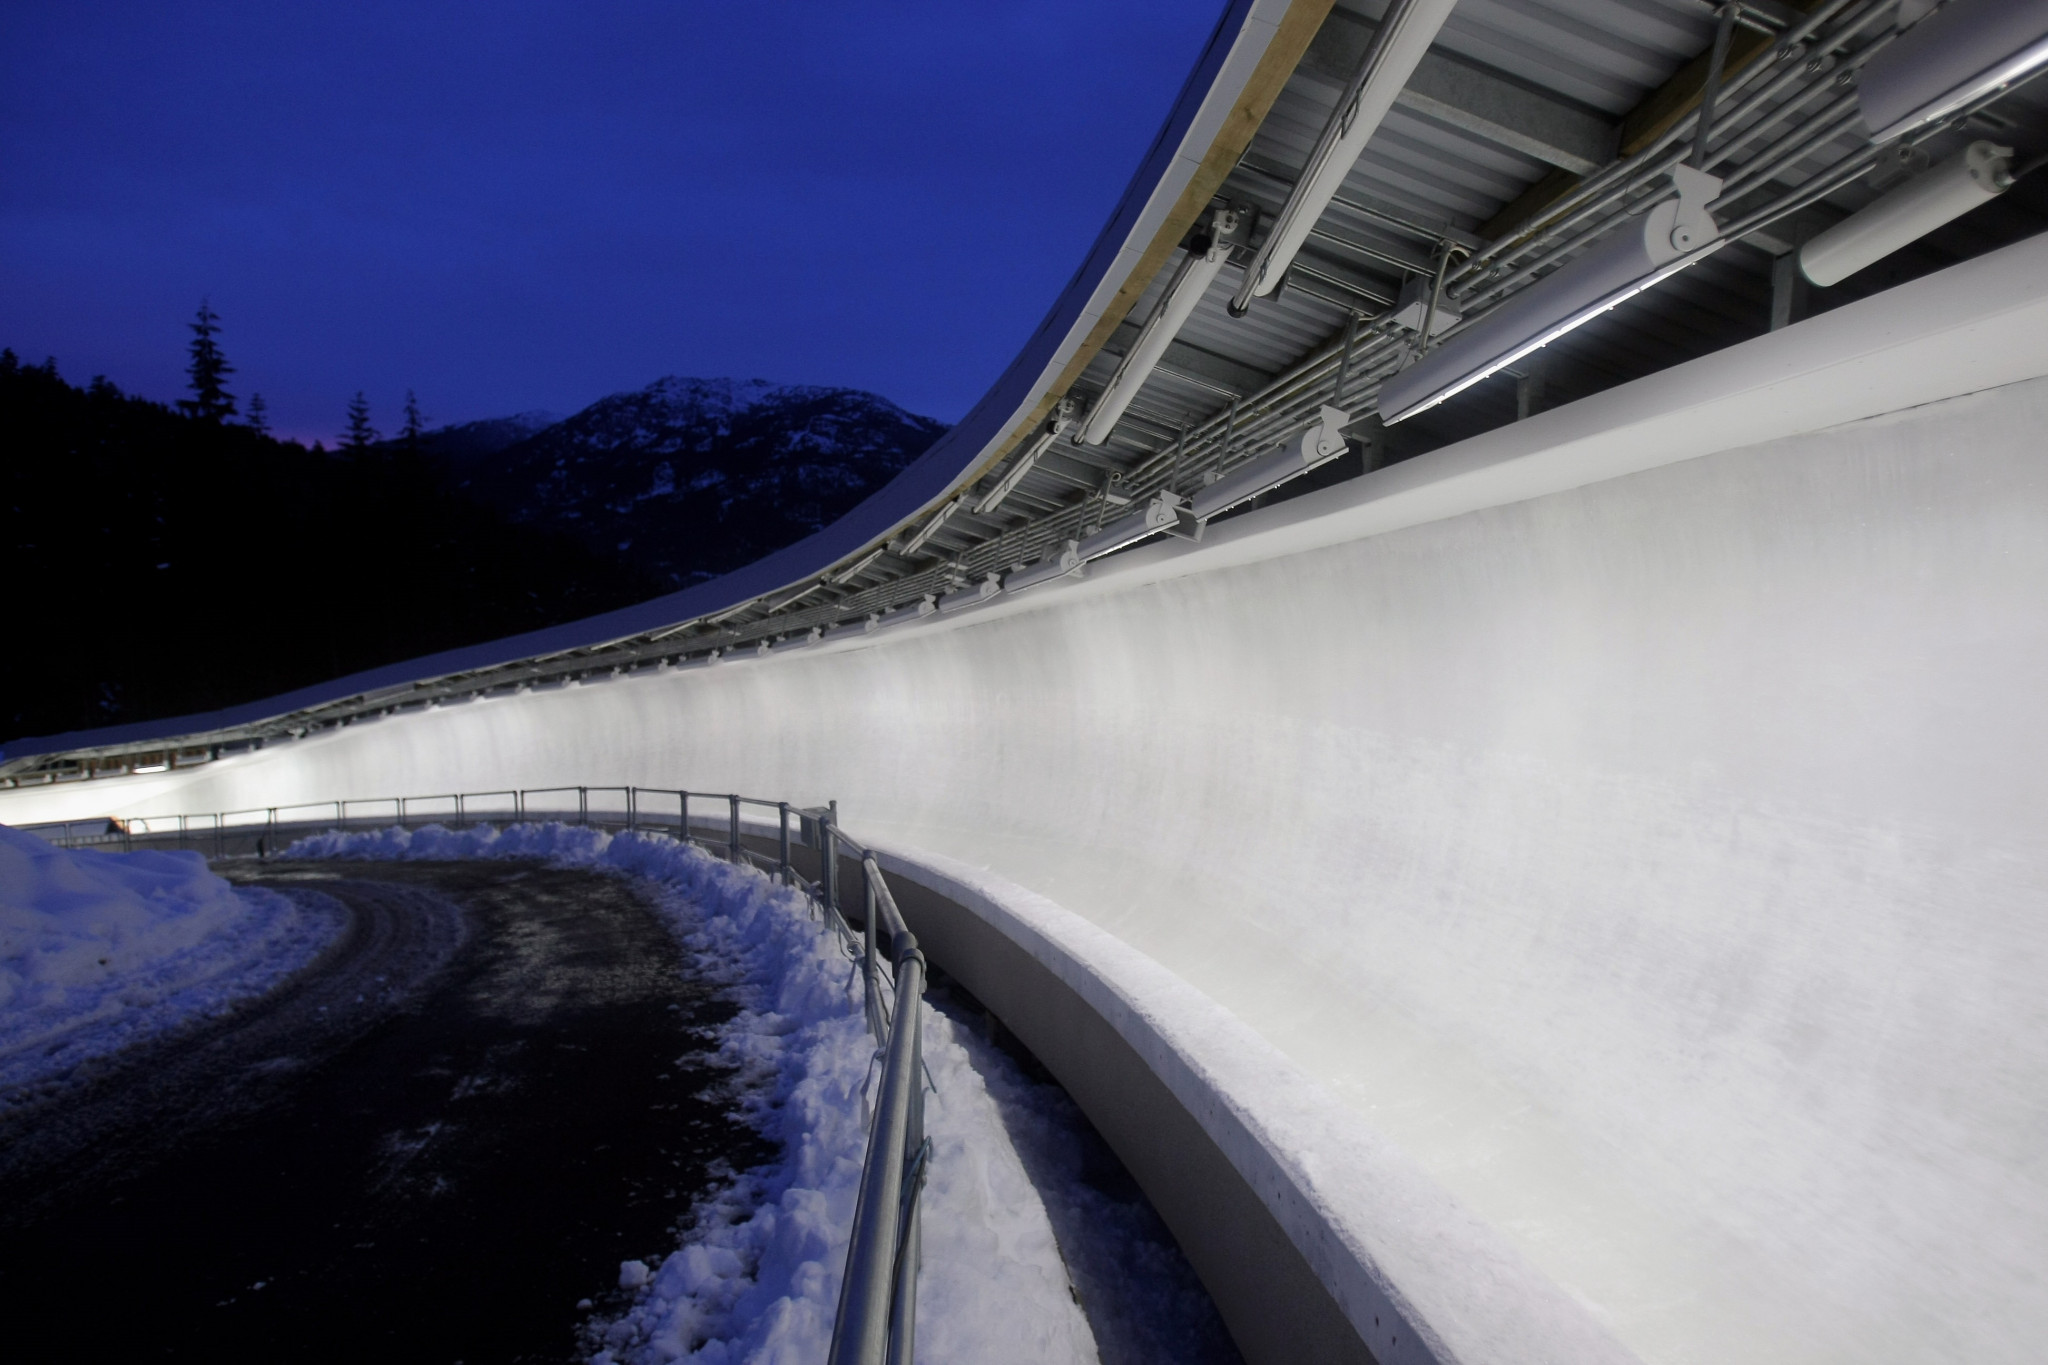 The Whistler Sliding Centre is set to host the first IBSF World Cup event of the season ©Getty Images